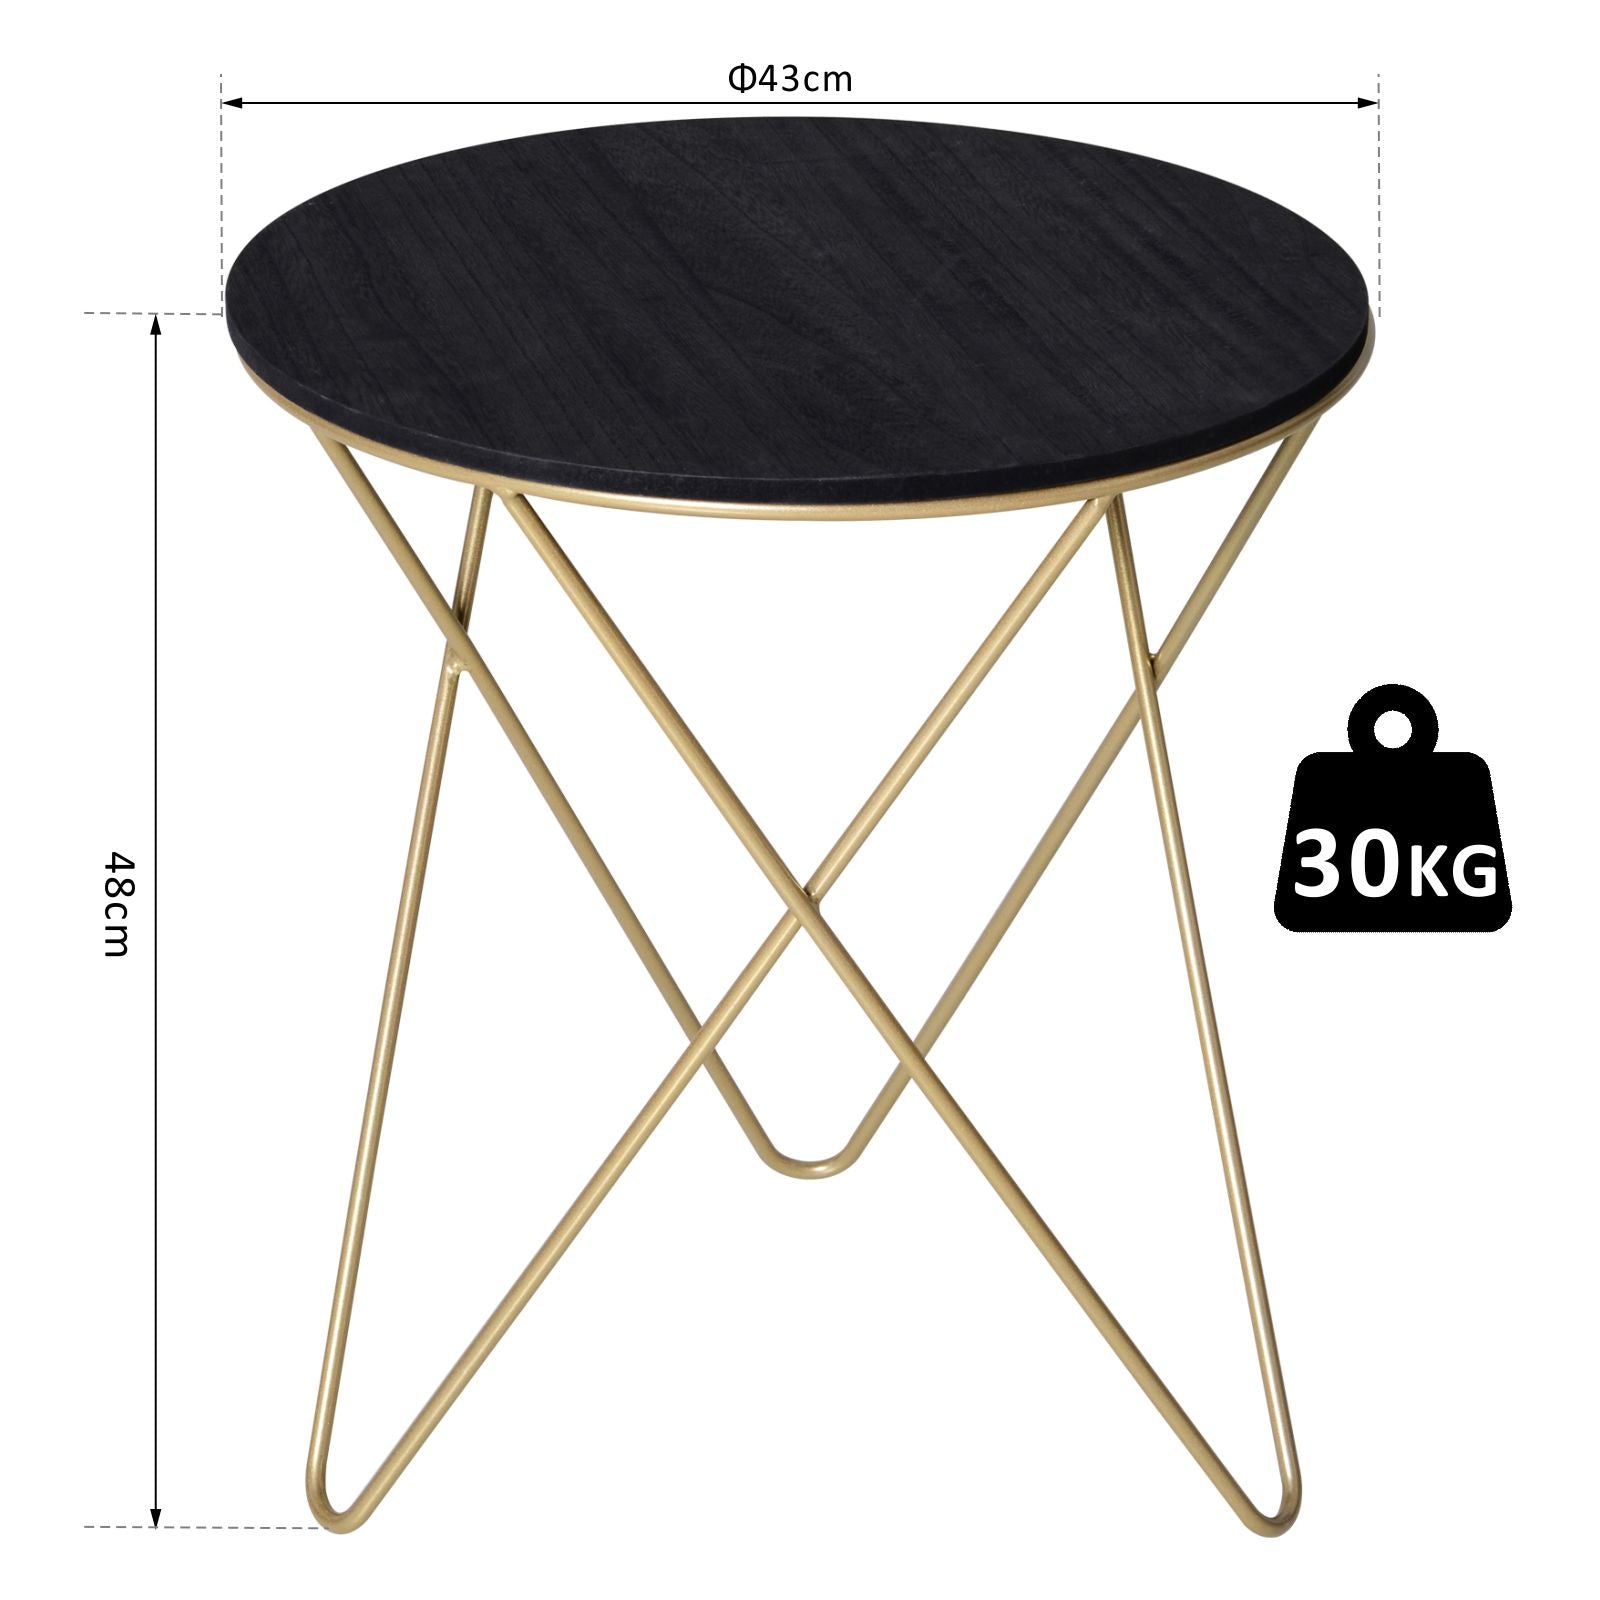 Wooden Metal Coffee Table, Sofa End Side Bedside Table Modern Style, Round Table, Black Gold Color (43cm), HOMCOM, 3